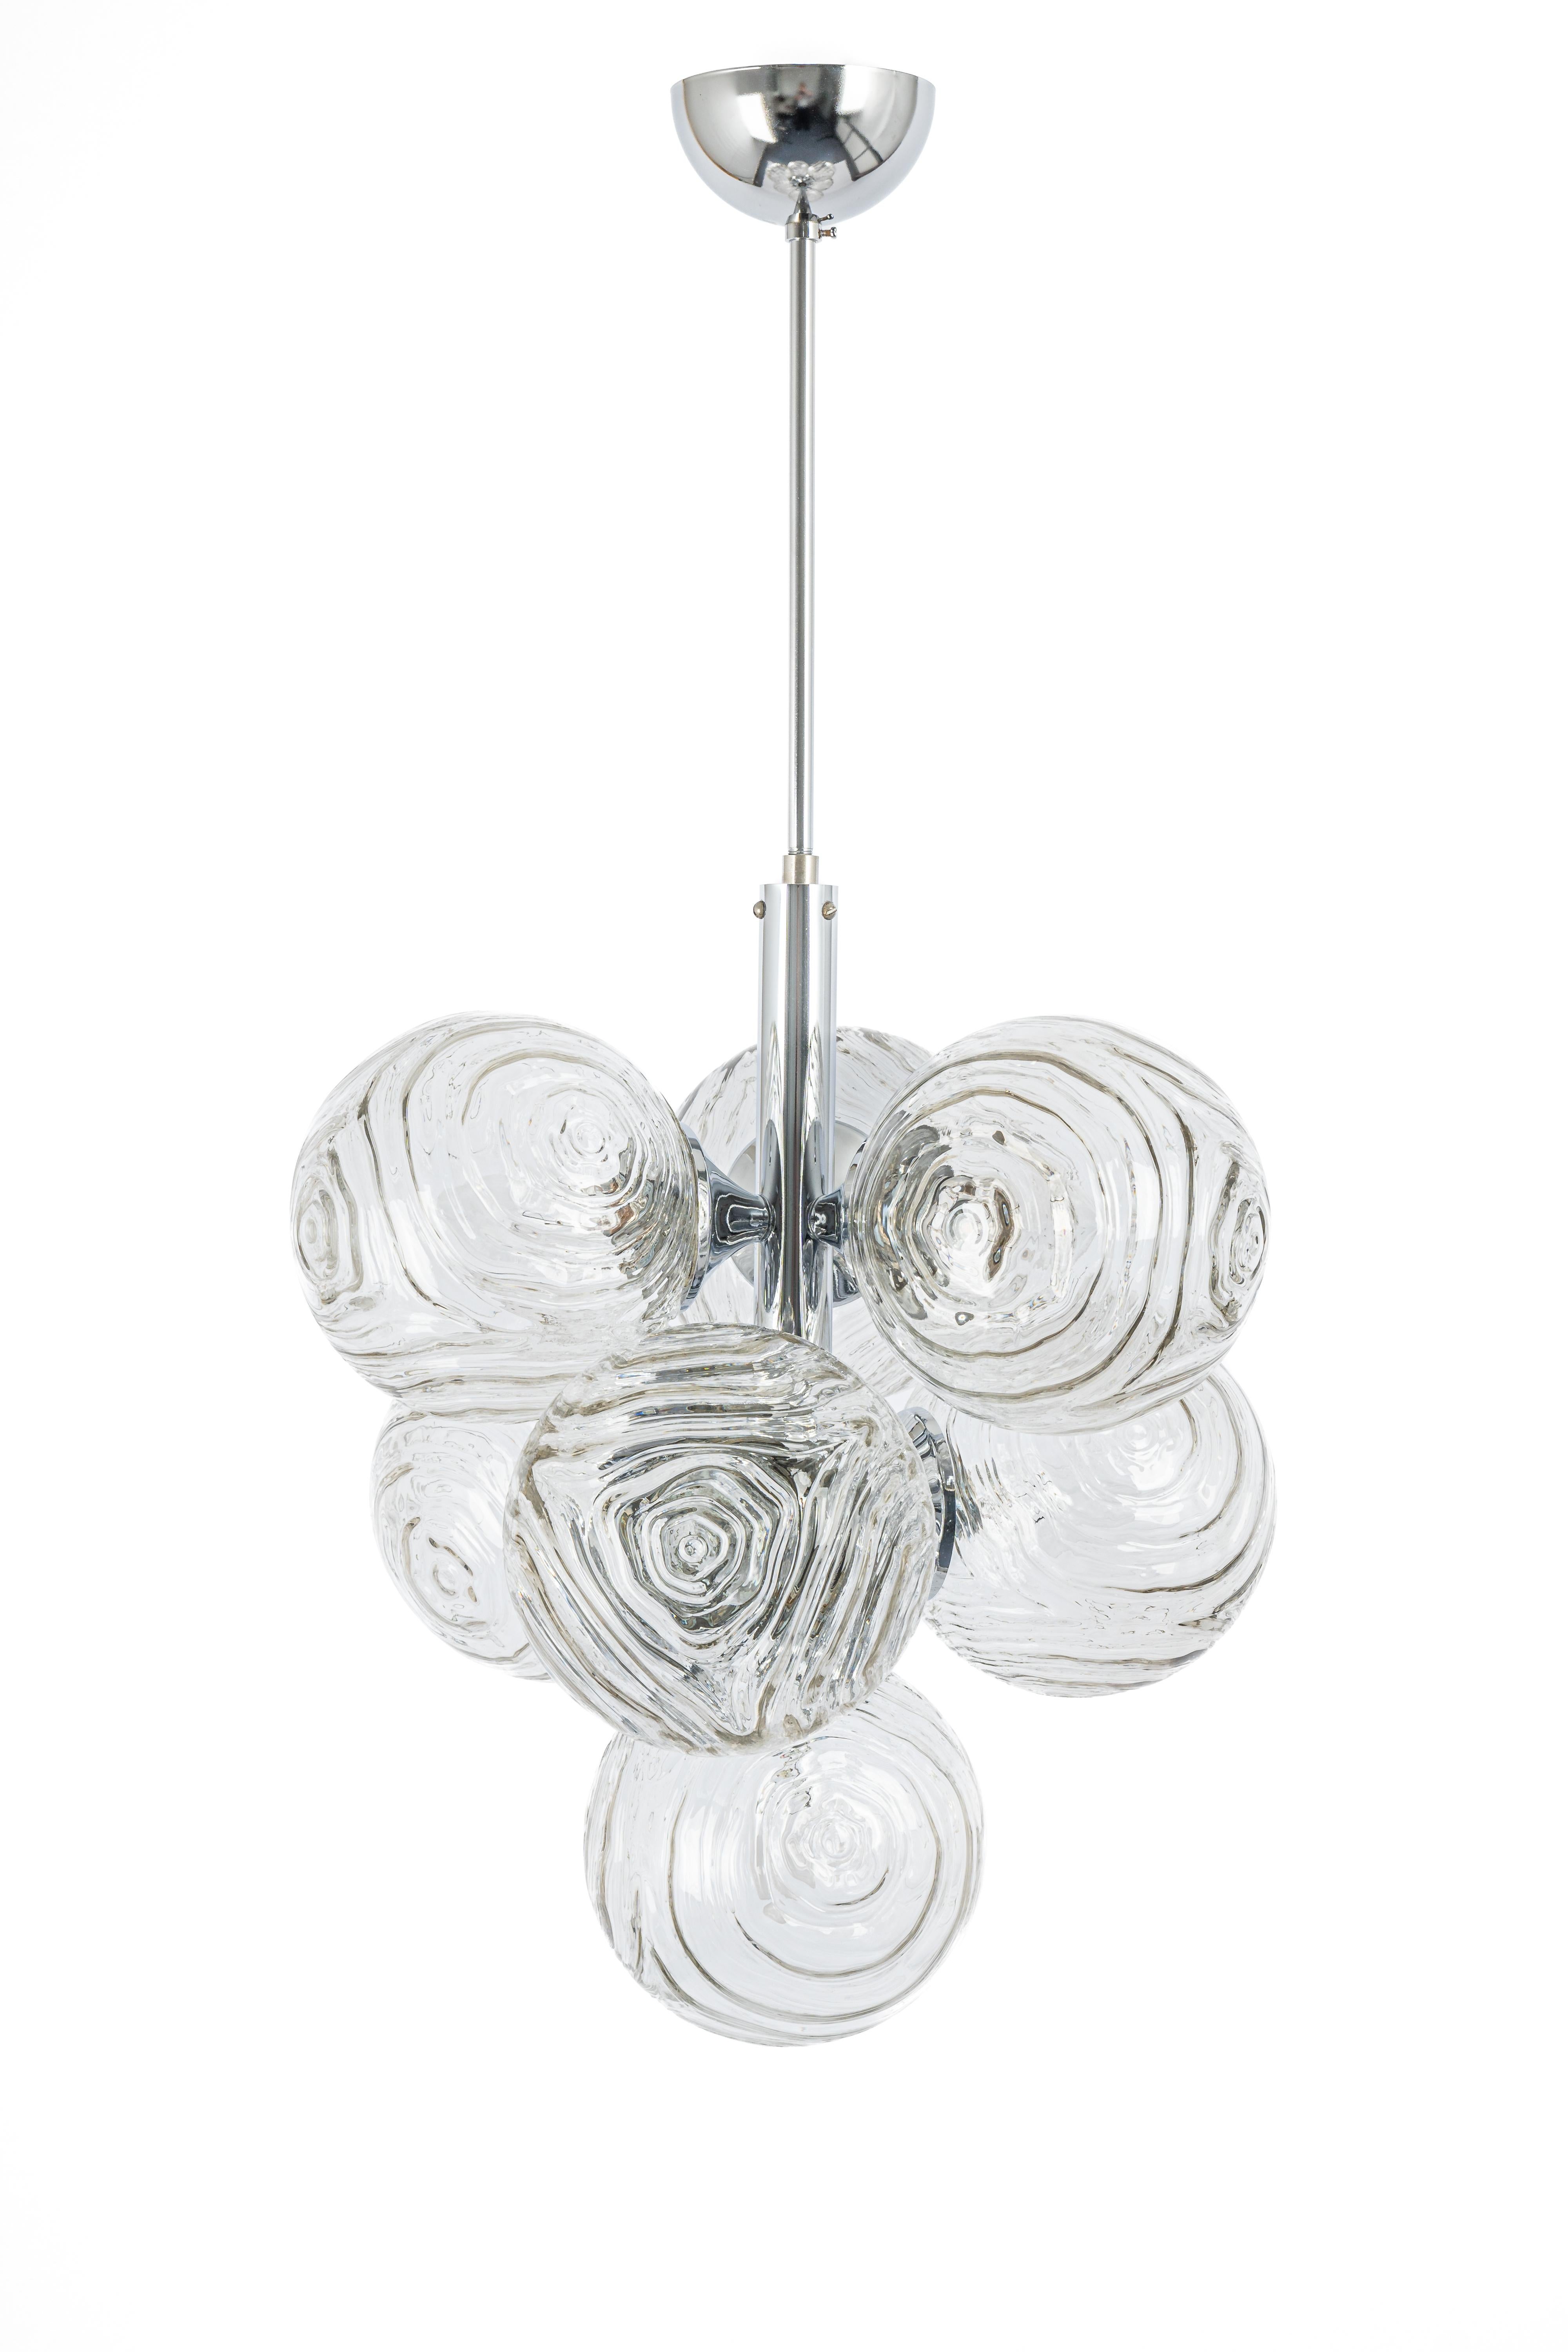 Stunning 6-arm Sputnik chandelier with 7 glass shades by Richard Essig, Germany, 1960s

It needs 7 candelabra size bulbs up to 40 watts each.Light bulbs are not included. It is possible to install this fixture in all countries (US, UK, Europe, Asia,